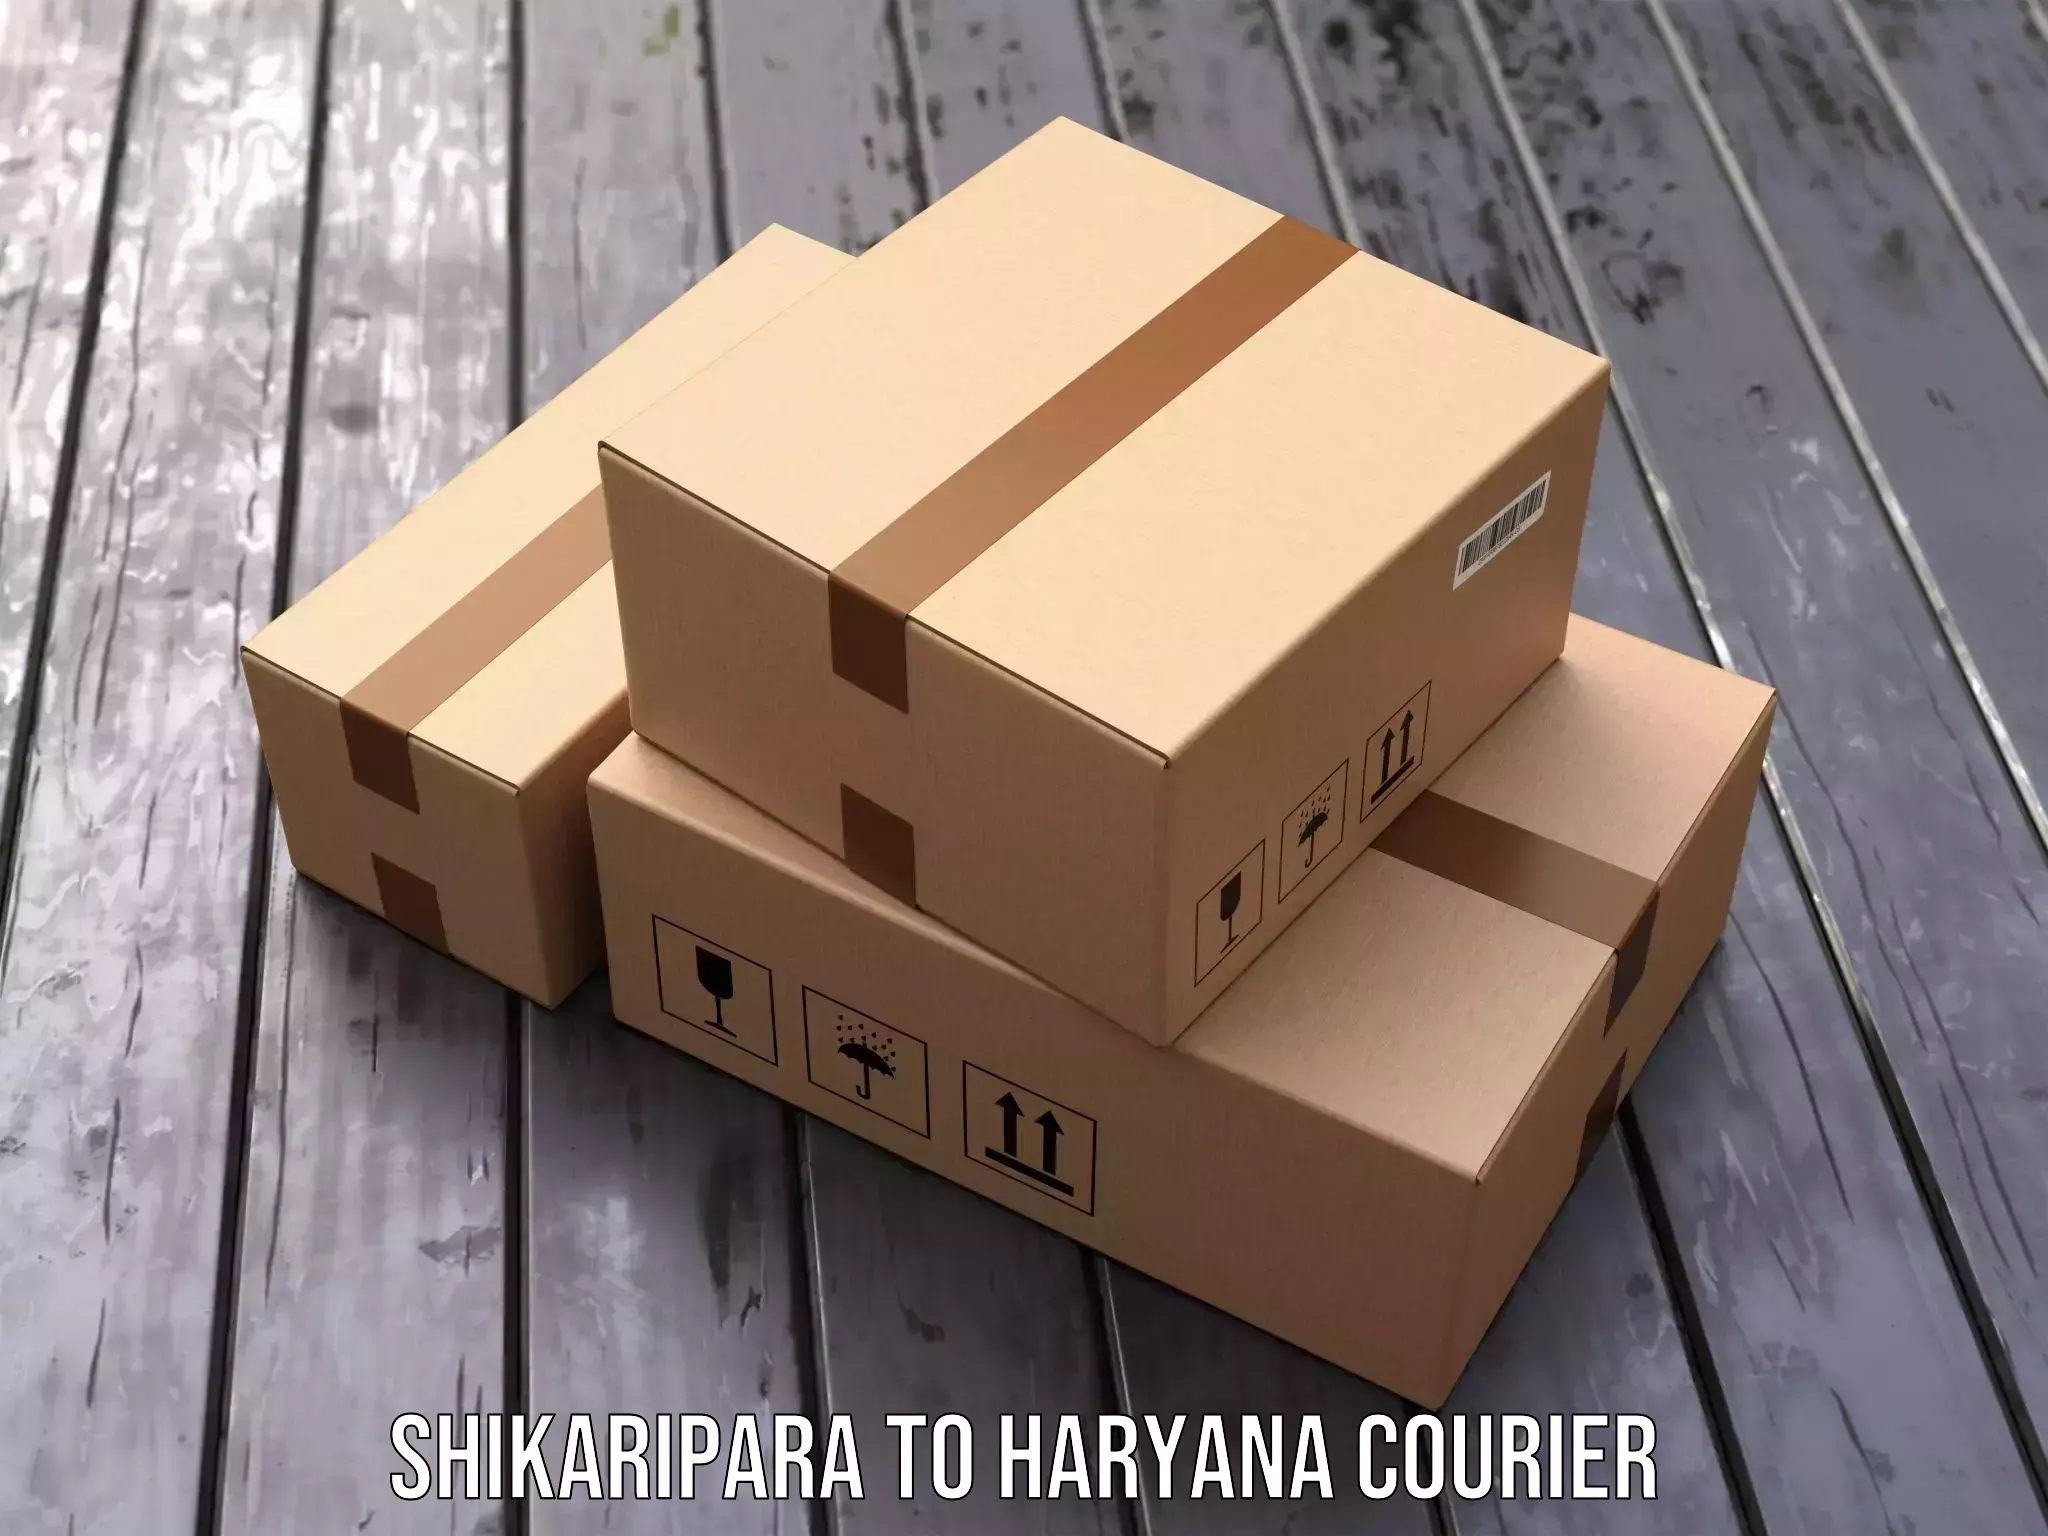 Overnight delivery services Shikaripara to Dharuhera